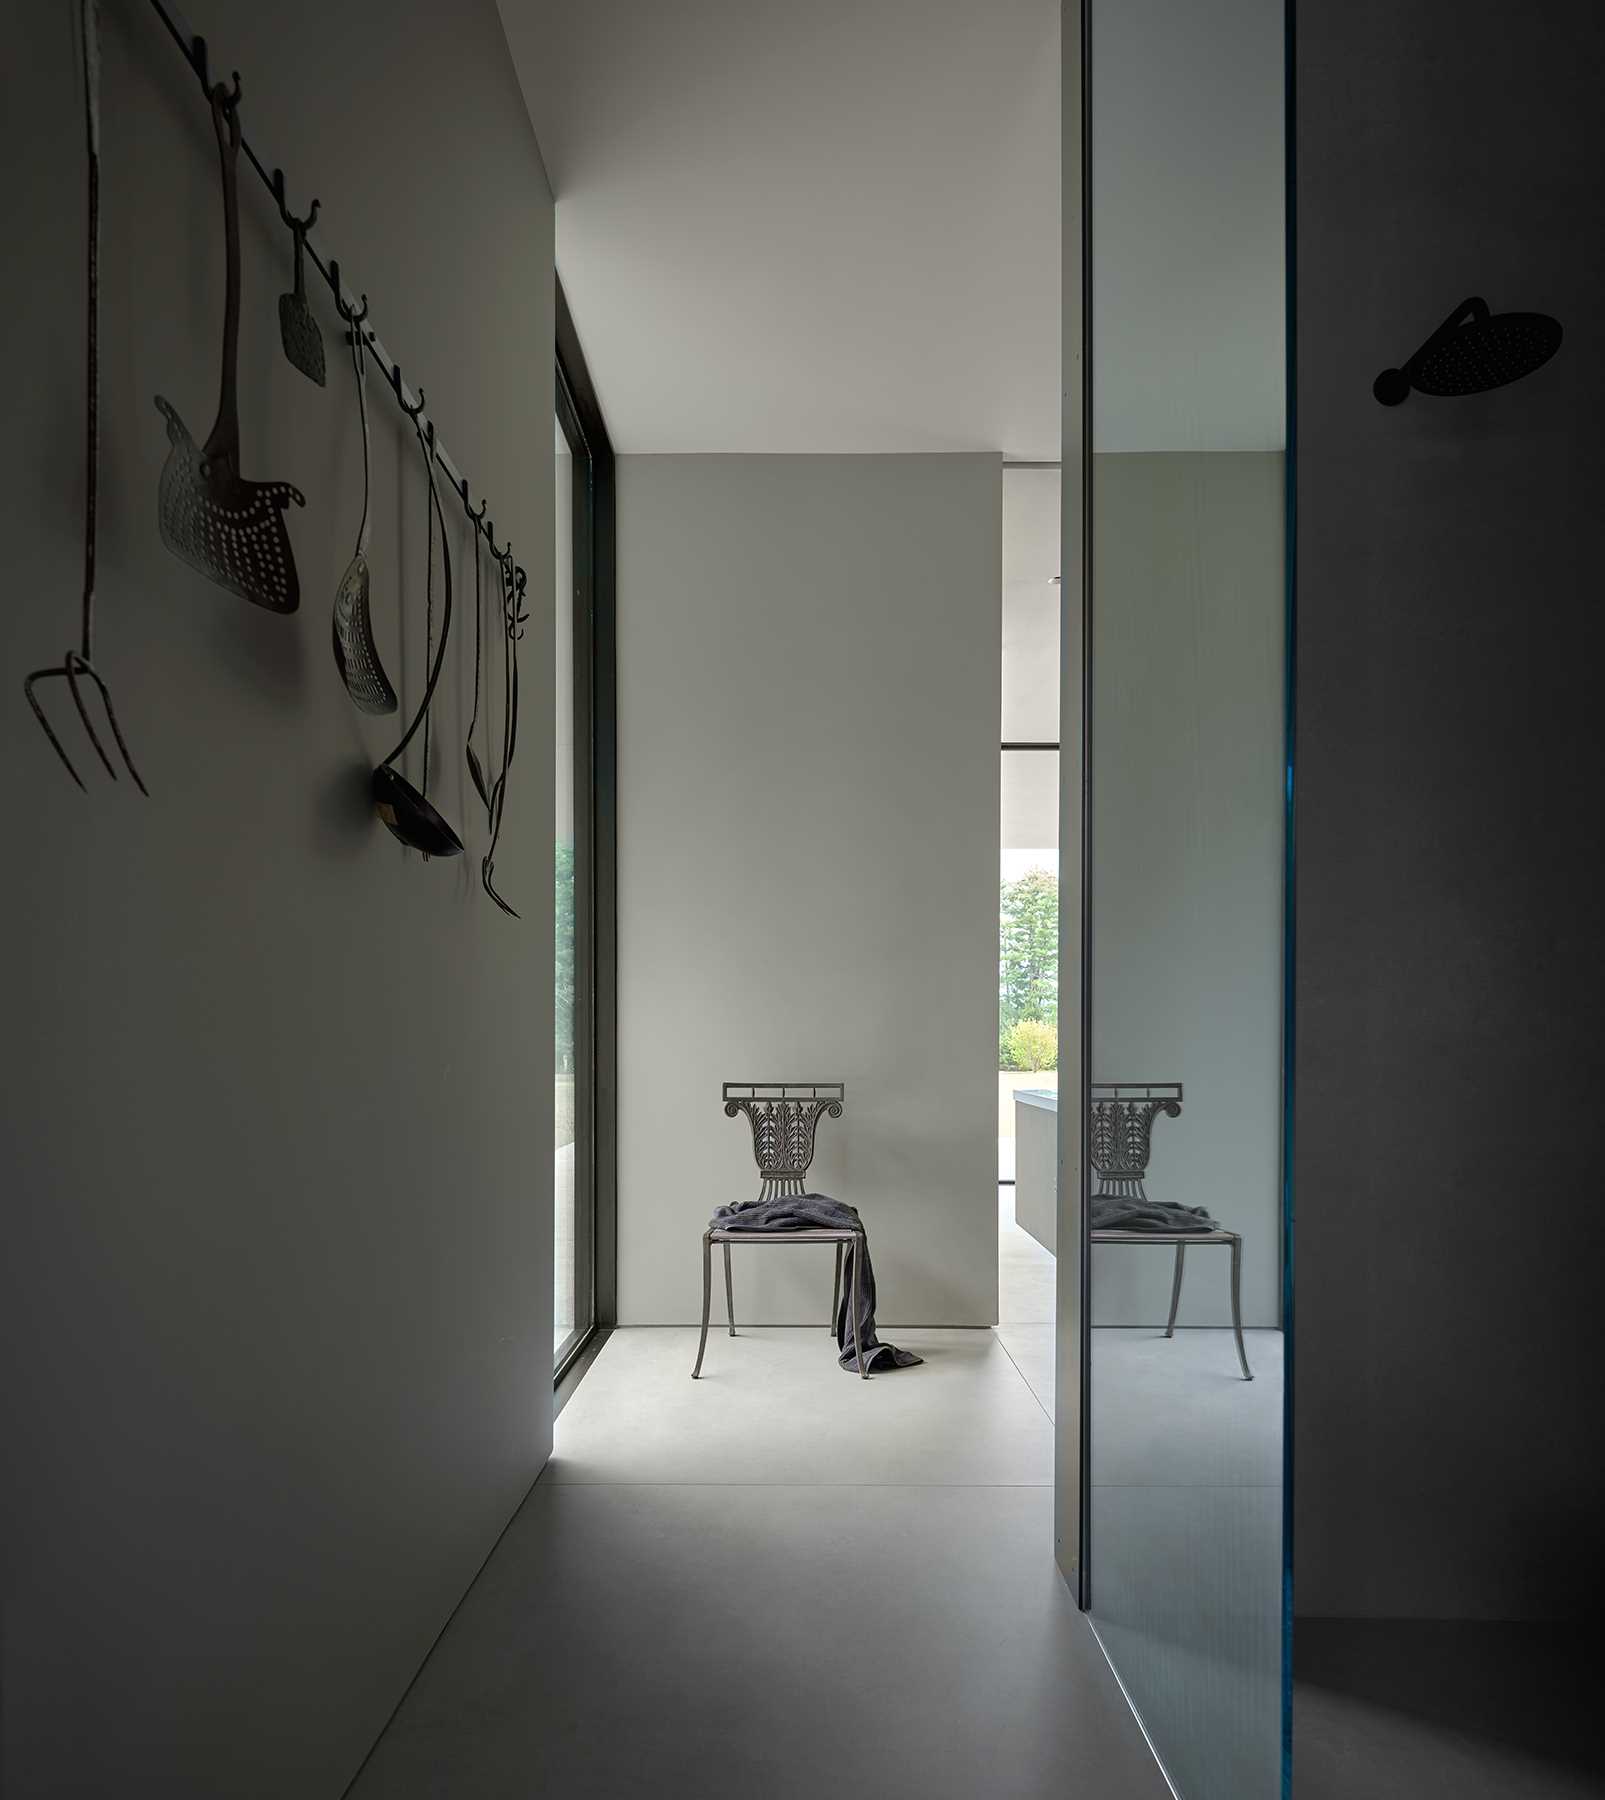 A primary bathroom becomes the backdrop for the homeowners collection of art and furniture.